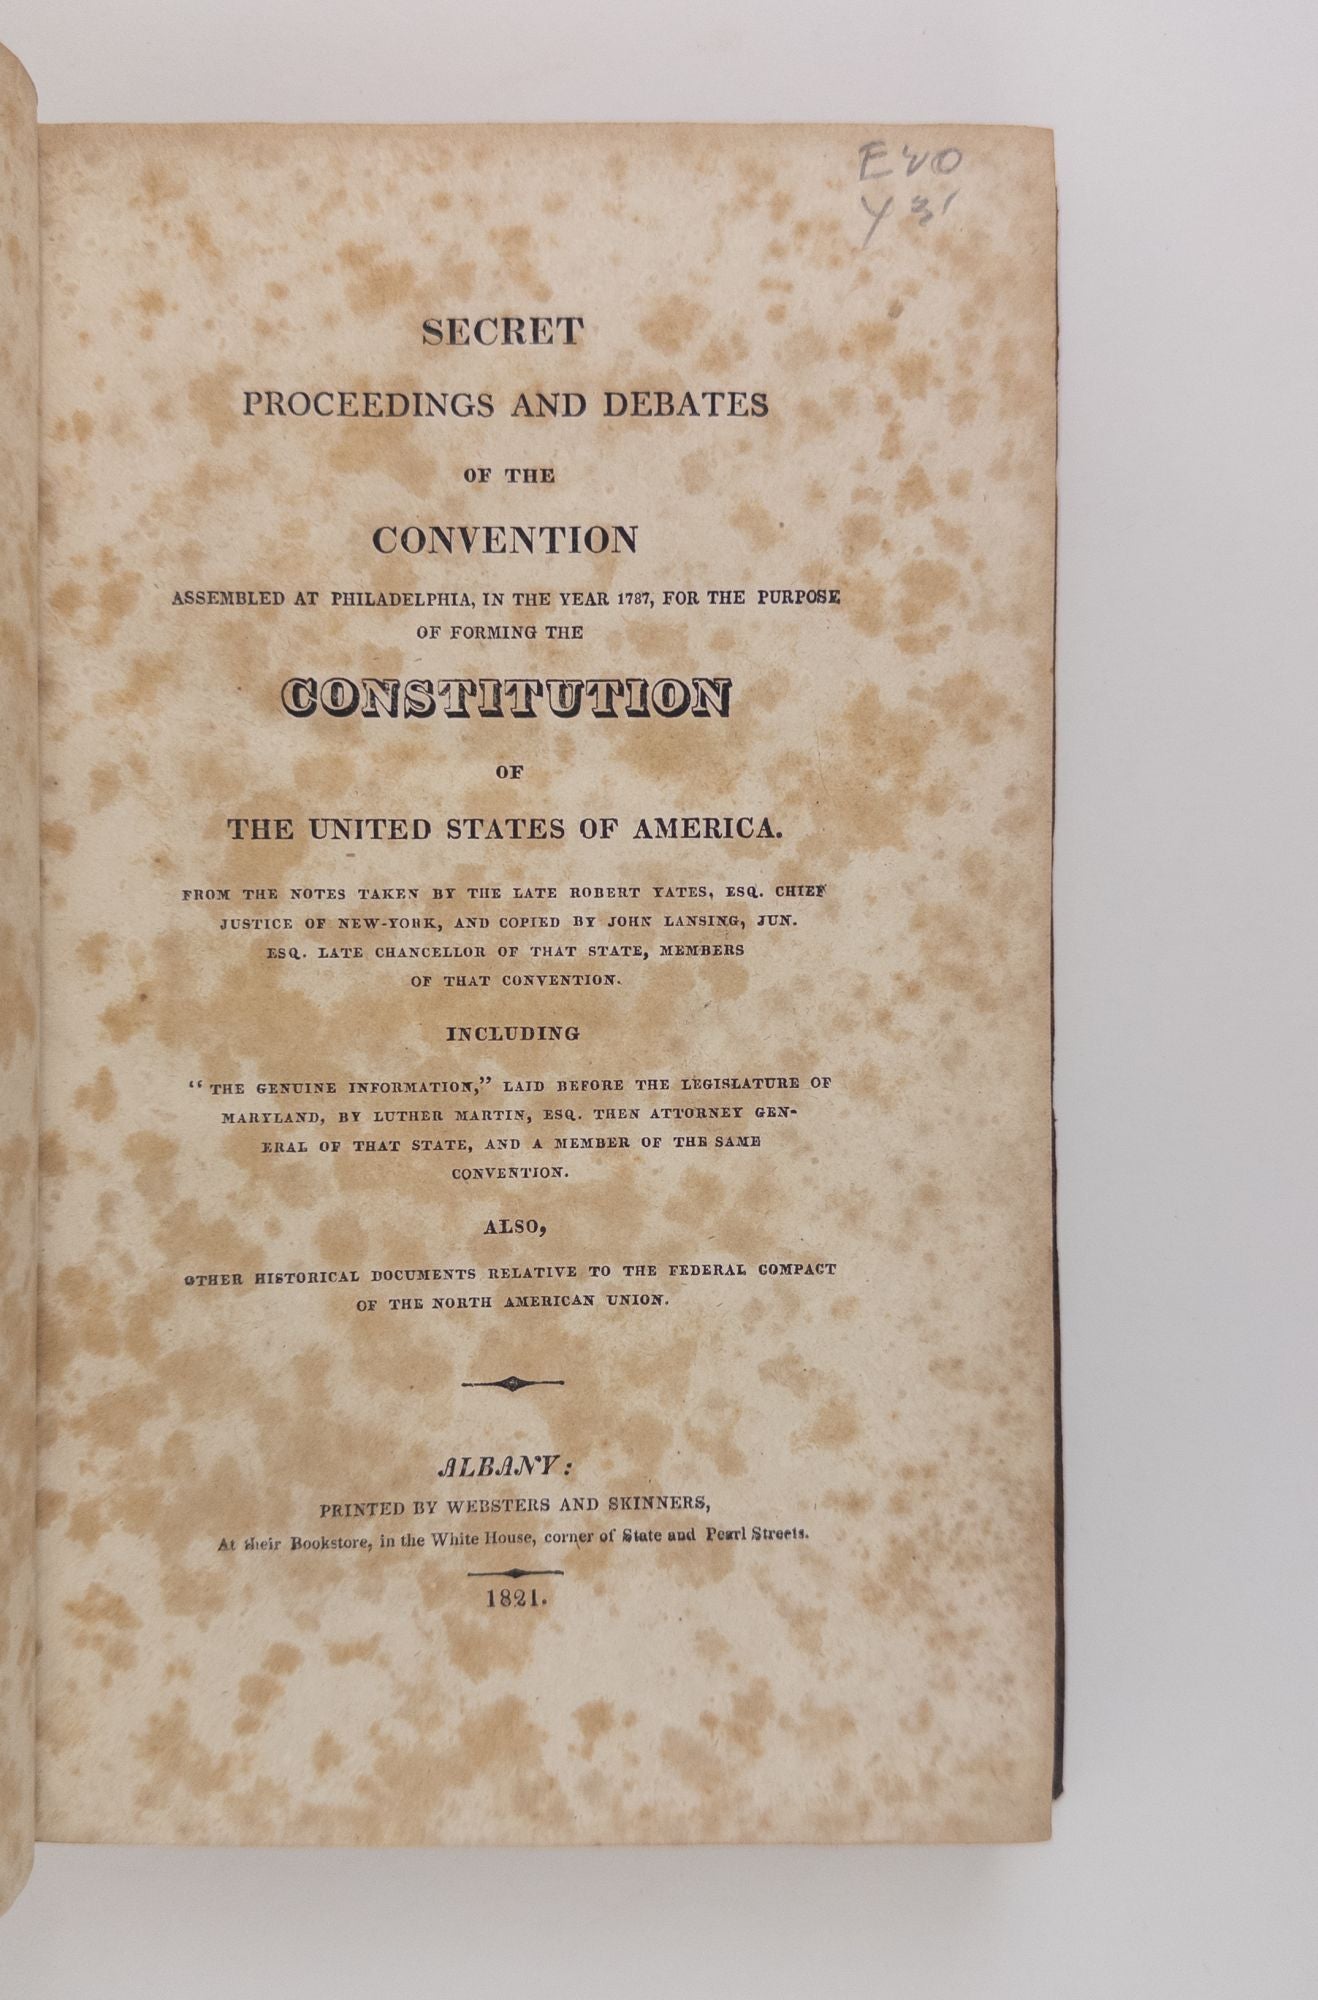 Product Image for SECRET PROCEEDINGS AND DEBATES OF THE CONVENTION ASSEMBLED AT PHILADELPHIA, IN THE YEAR 1787, FOR THE PURPOSE OF FORMING THE CONSTITUTION OF THE UNITED STATES OF AMERICA. FROM THE NOTES TAKEN BY THE LATE ROBERT TATES, ESQ. CHIEF JUSTICE OF NEW YORK, AND C